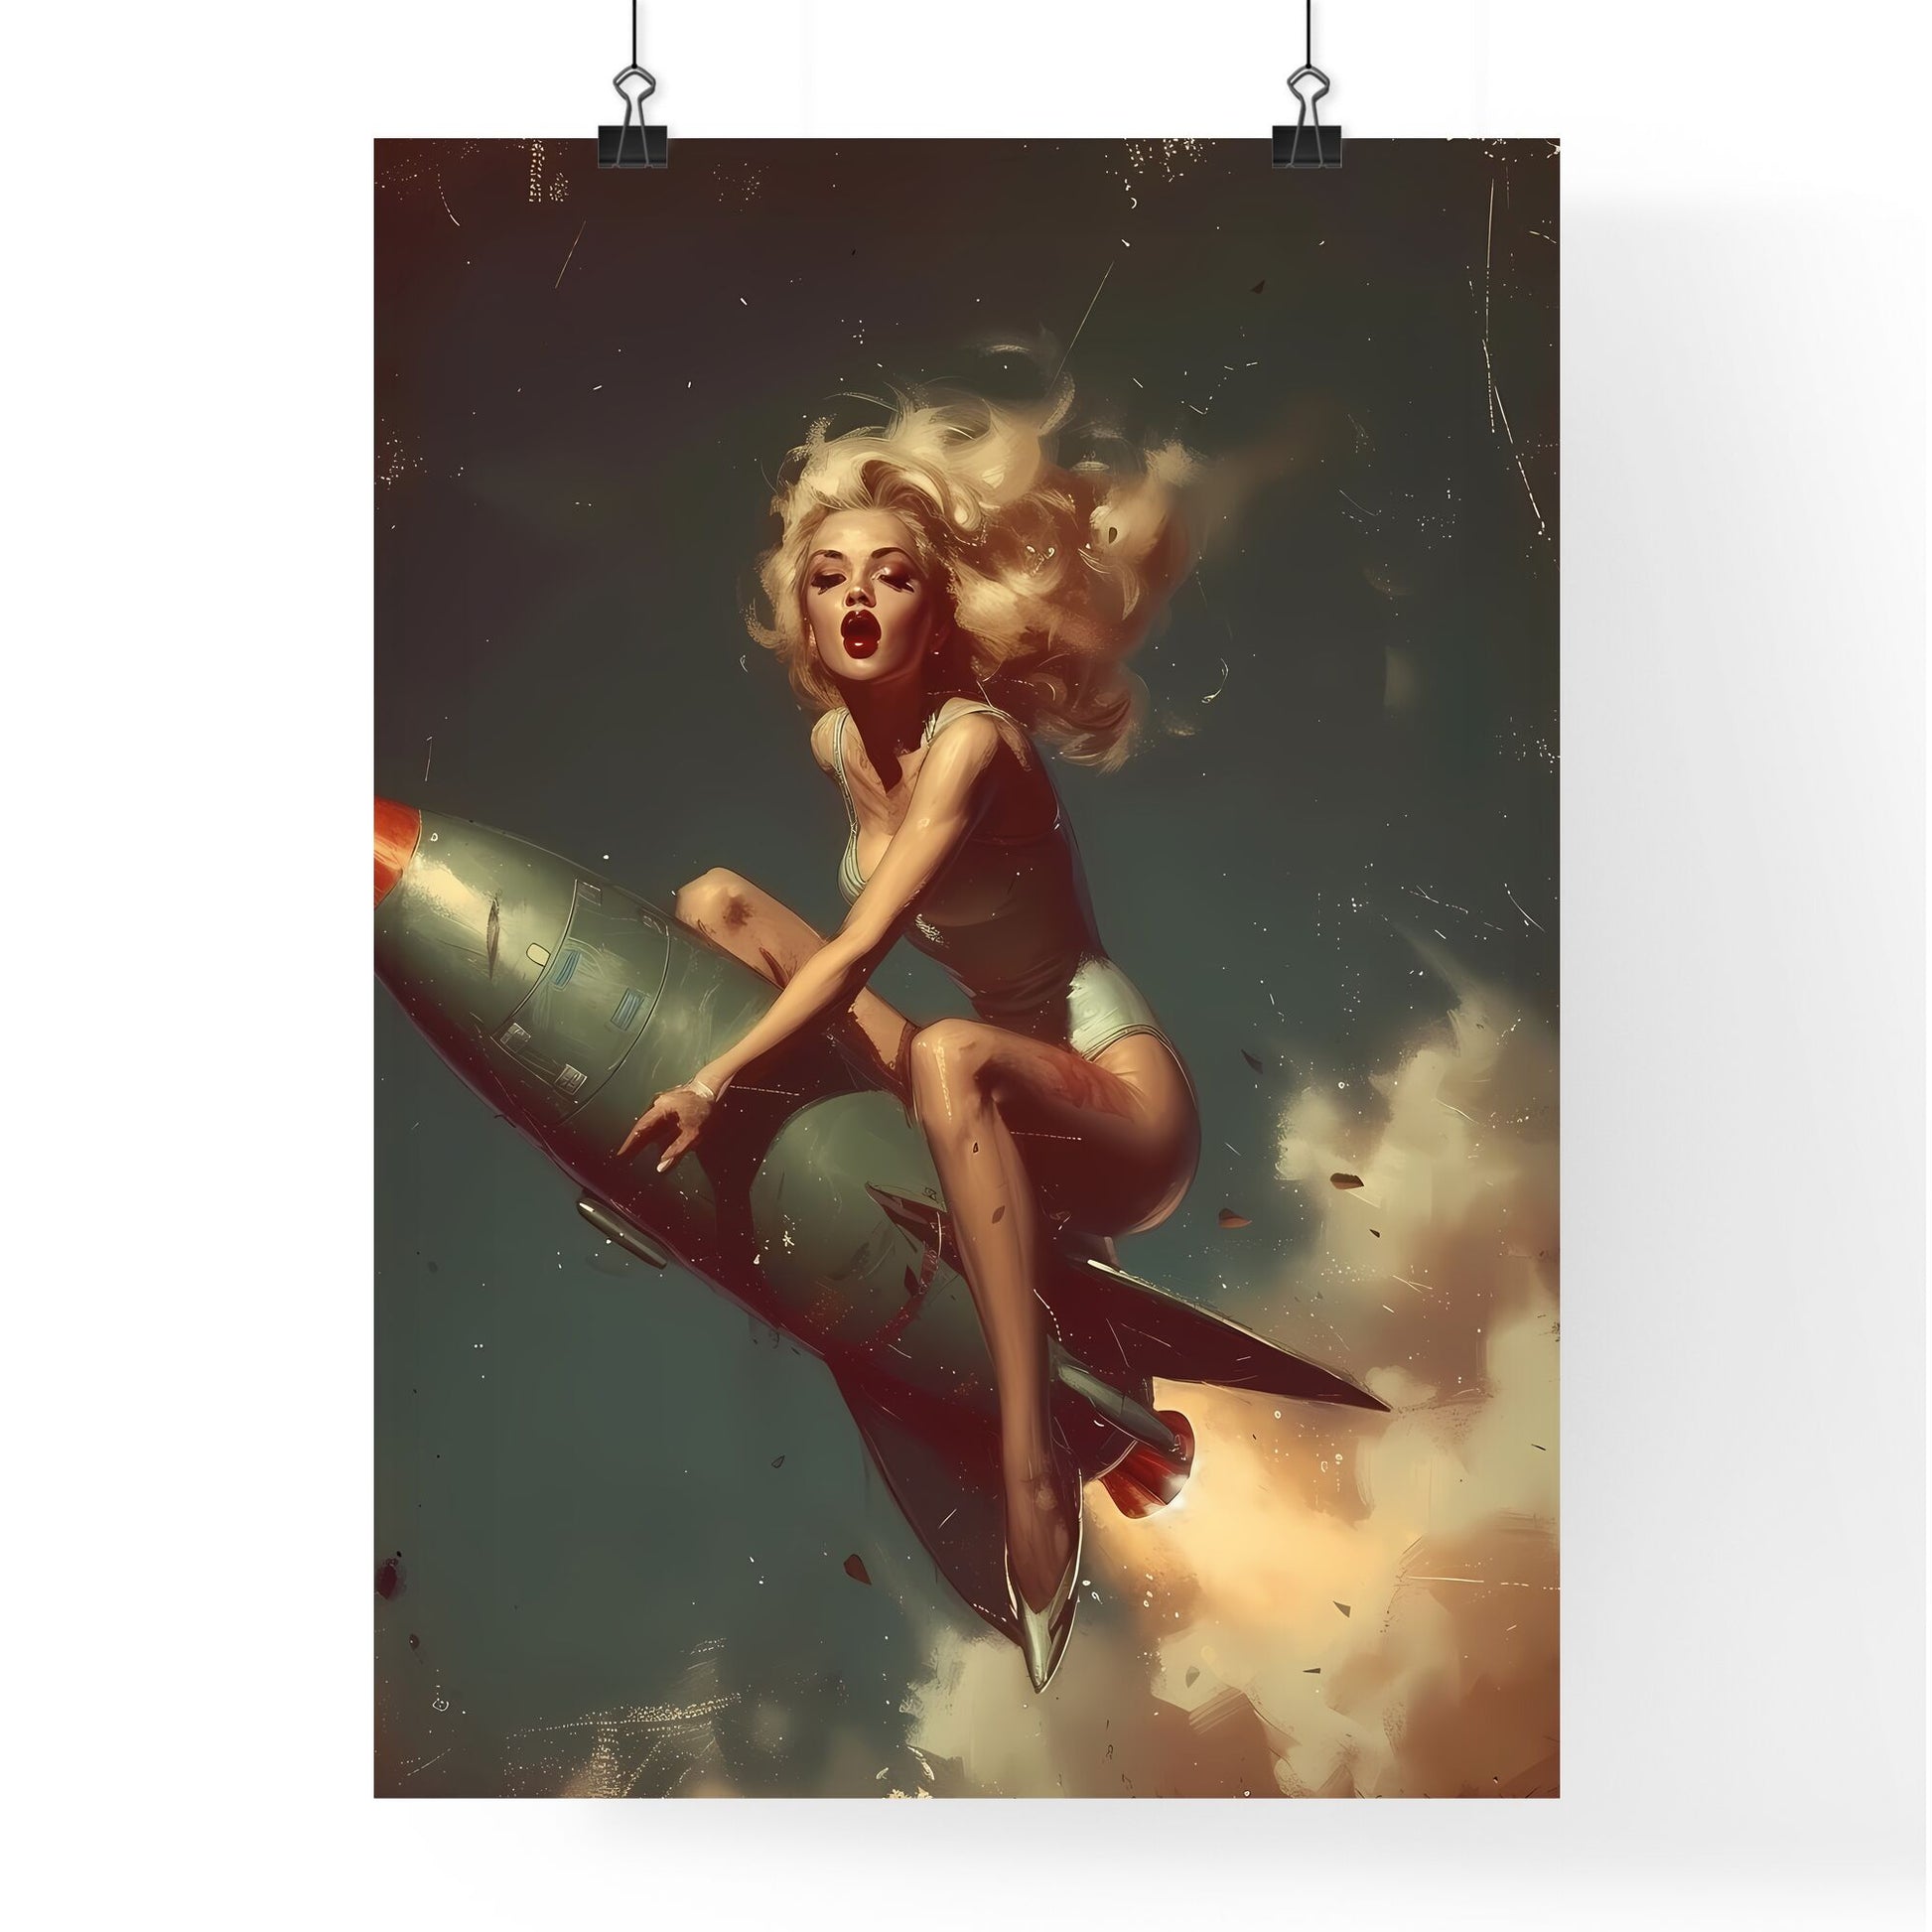 The head nurse sharply directed the nurses riding a rocket - Art print of a woman in garment sitting on a rocket Default Title